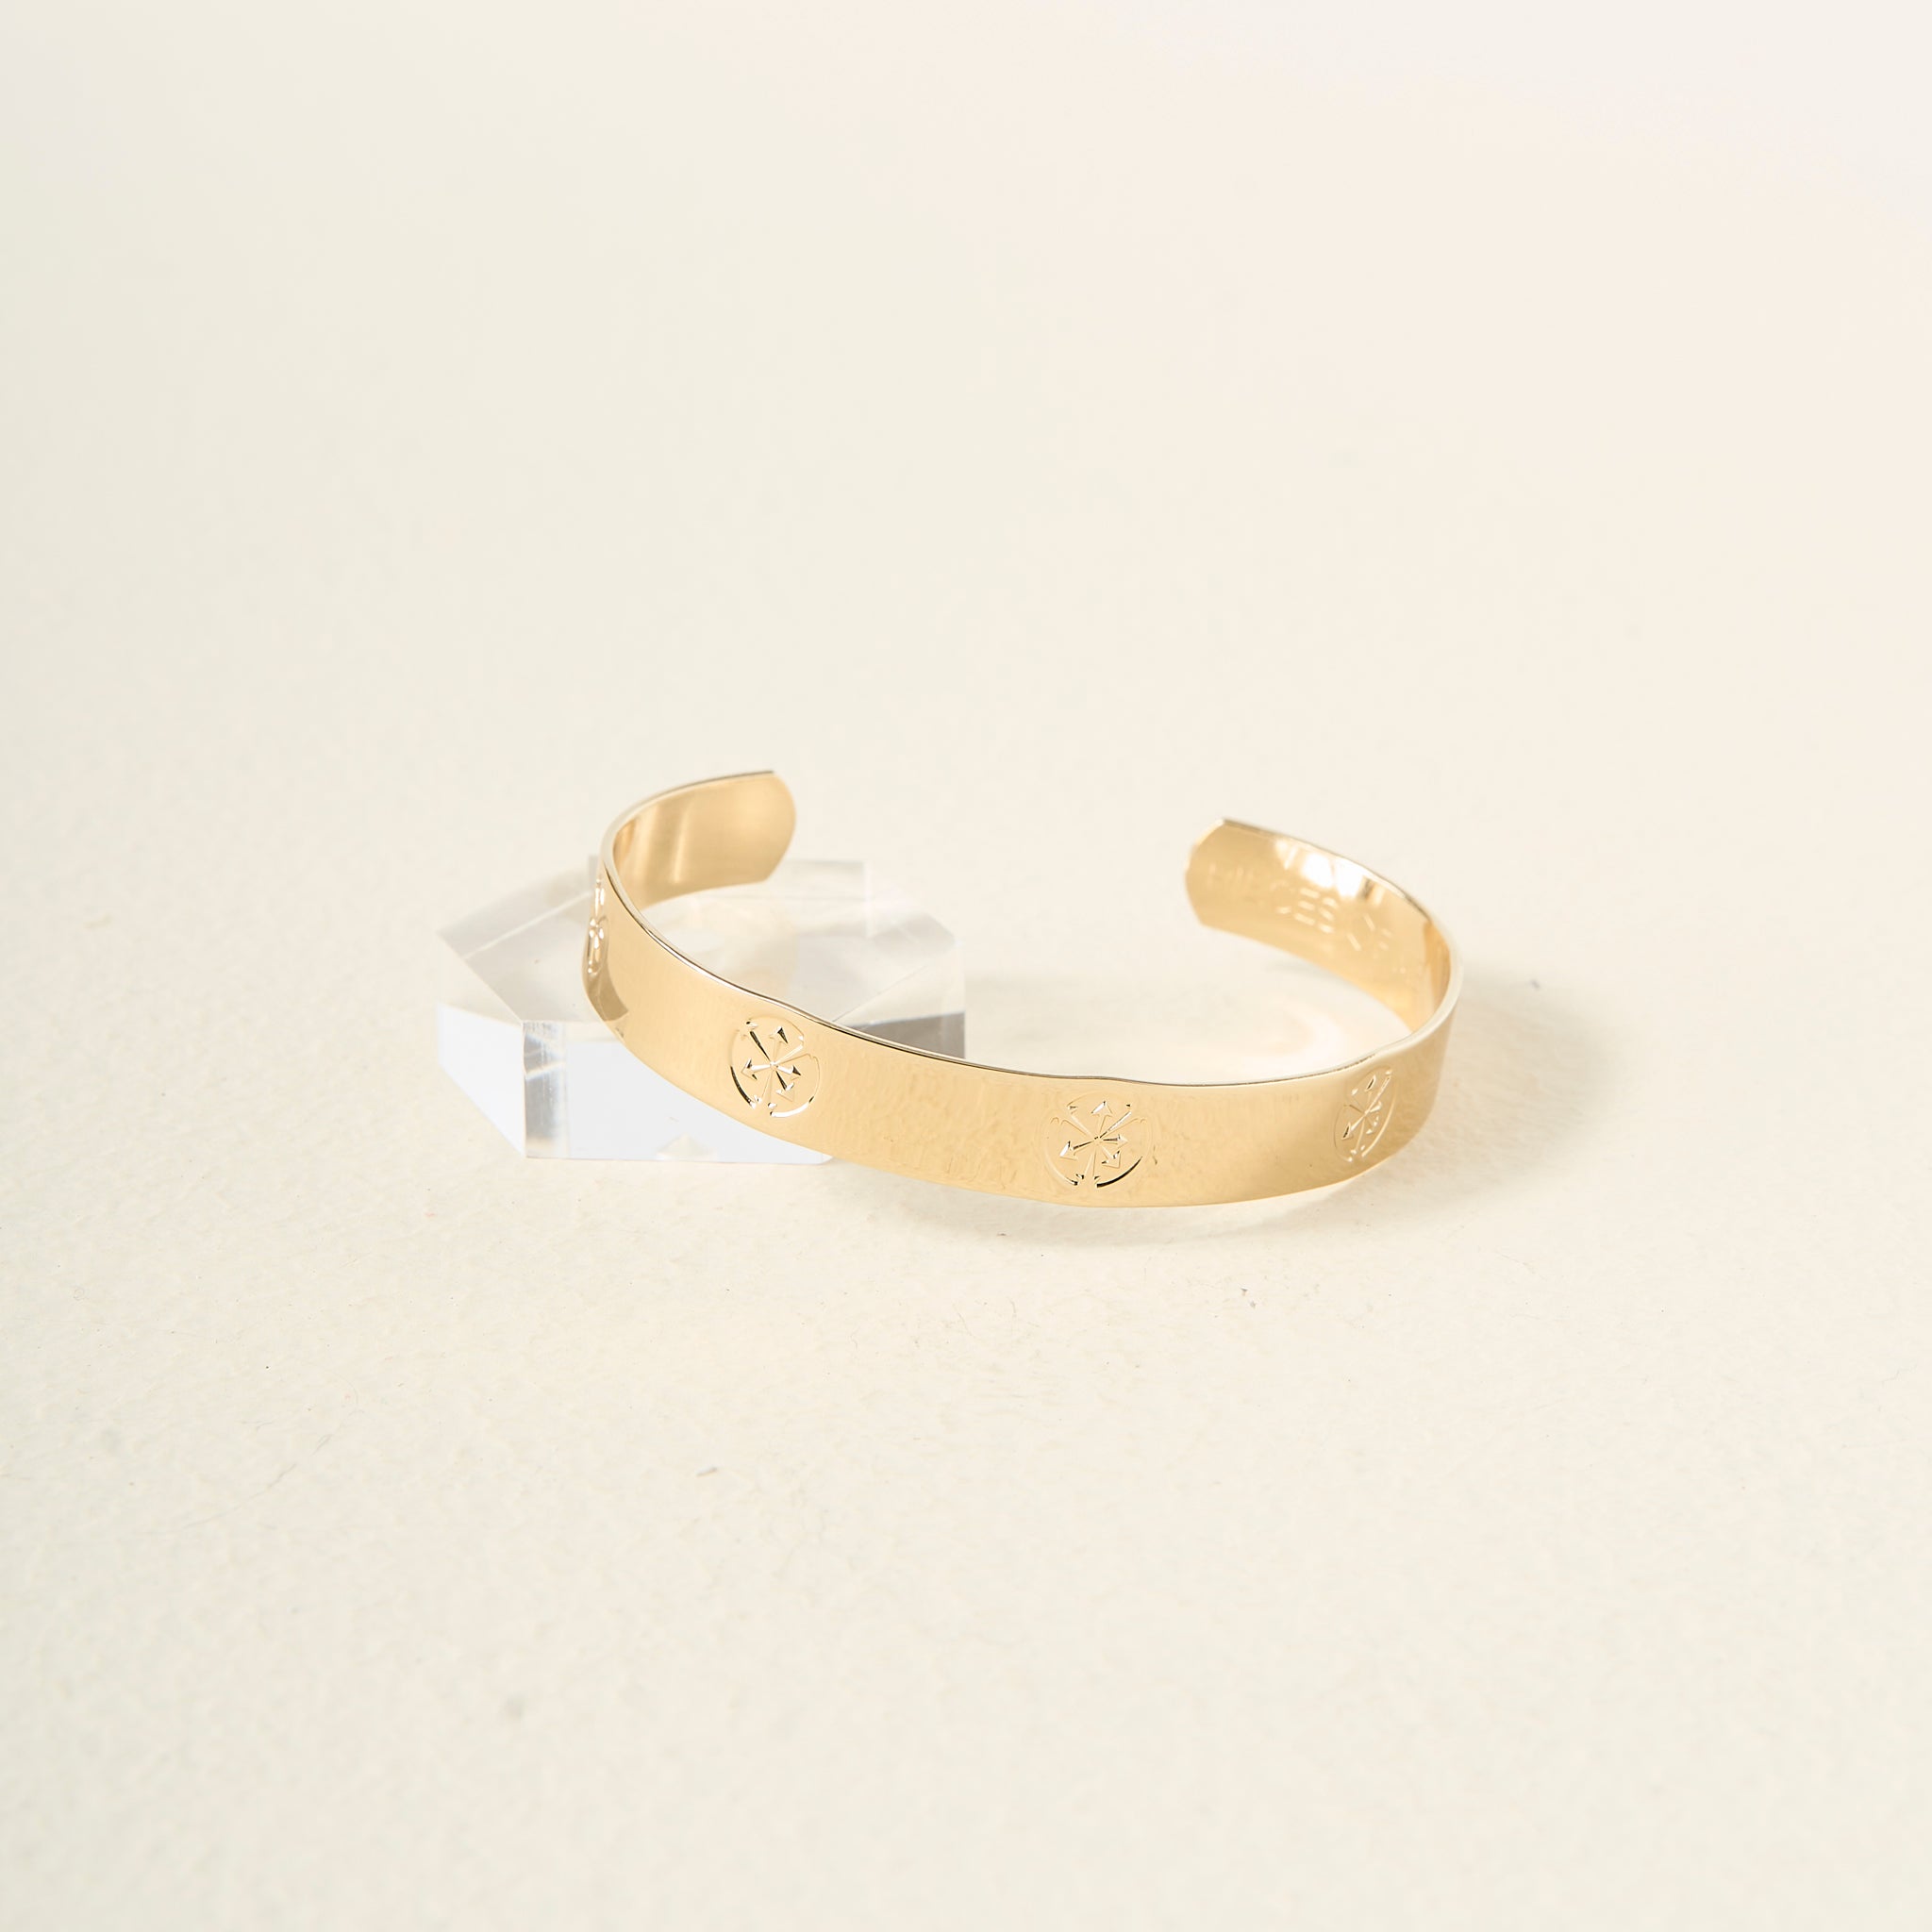 You Are Hard-Working Cuff Bracelet